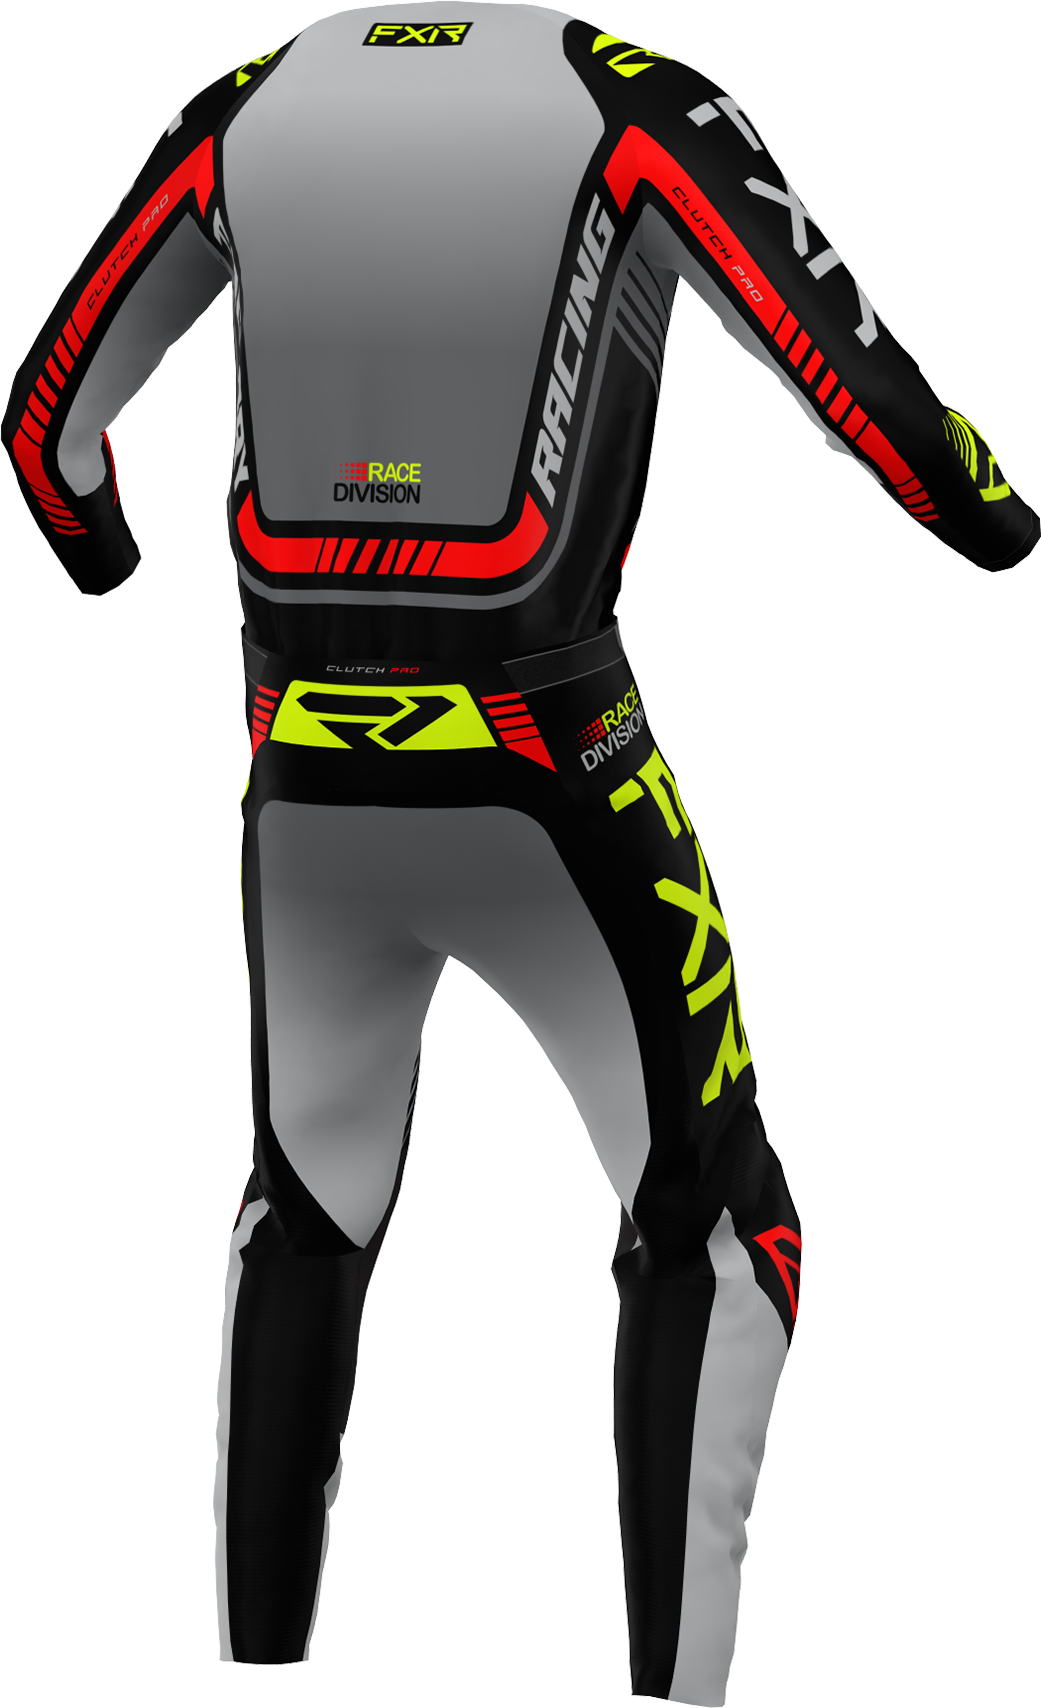 A 3D image of FXR's Clutch Pro MX Jersey and Pant in Grey/Black/Hi-Vis colorway